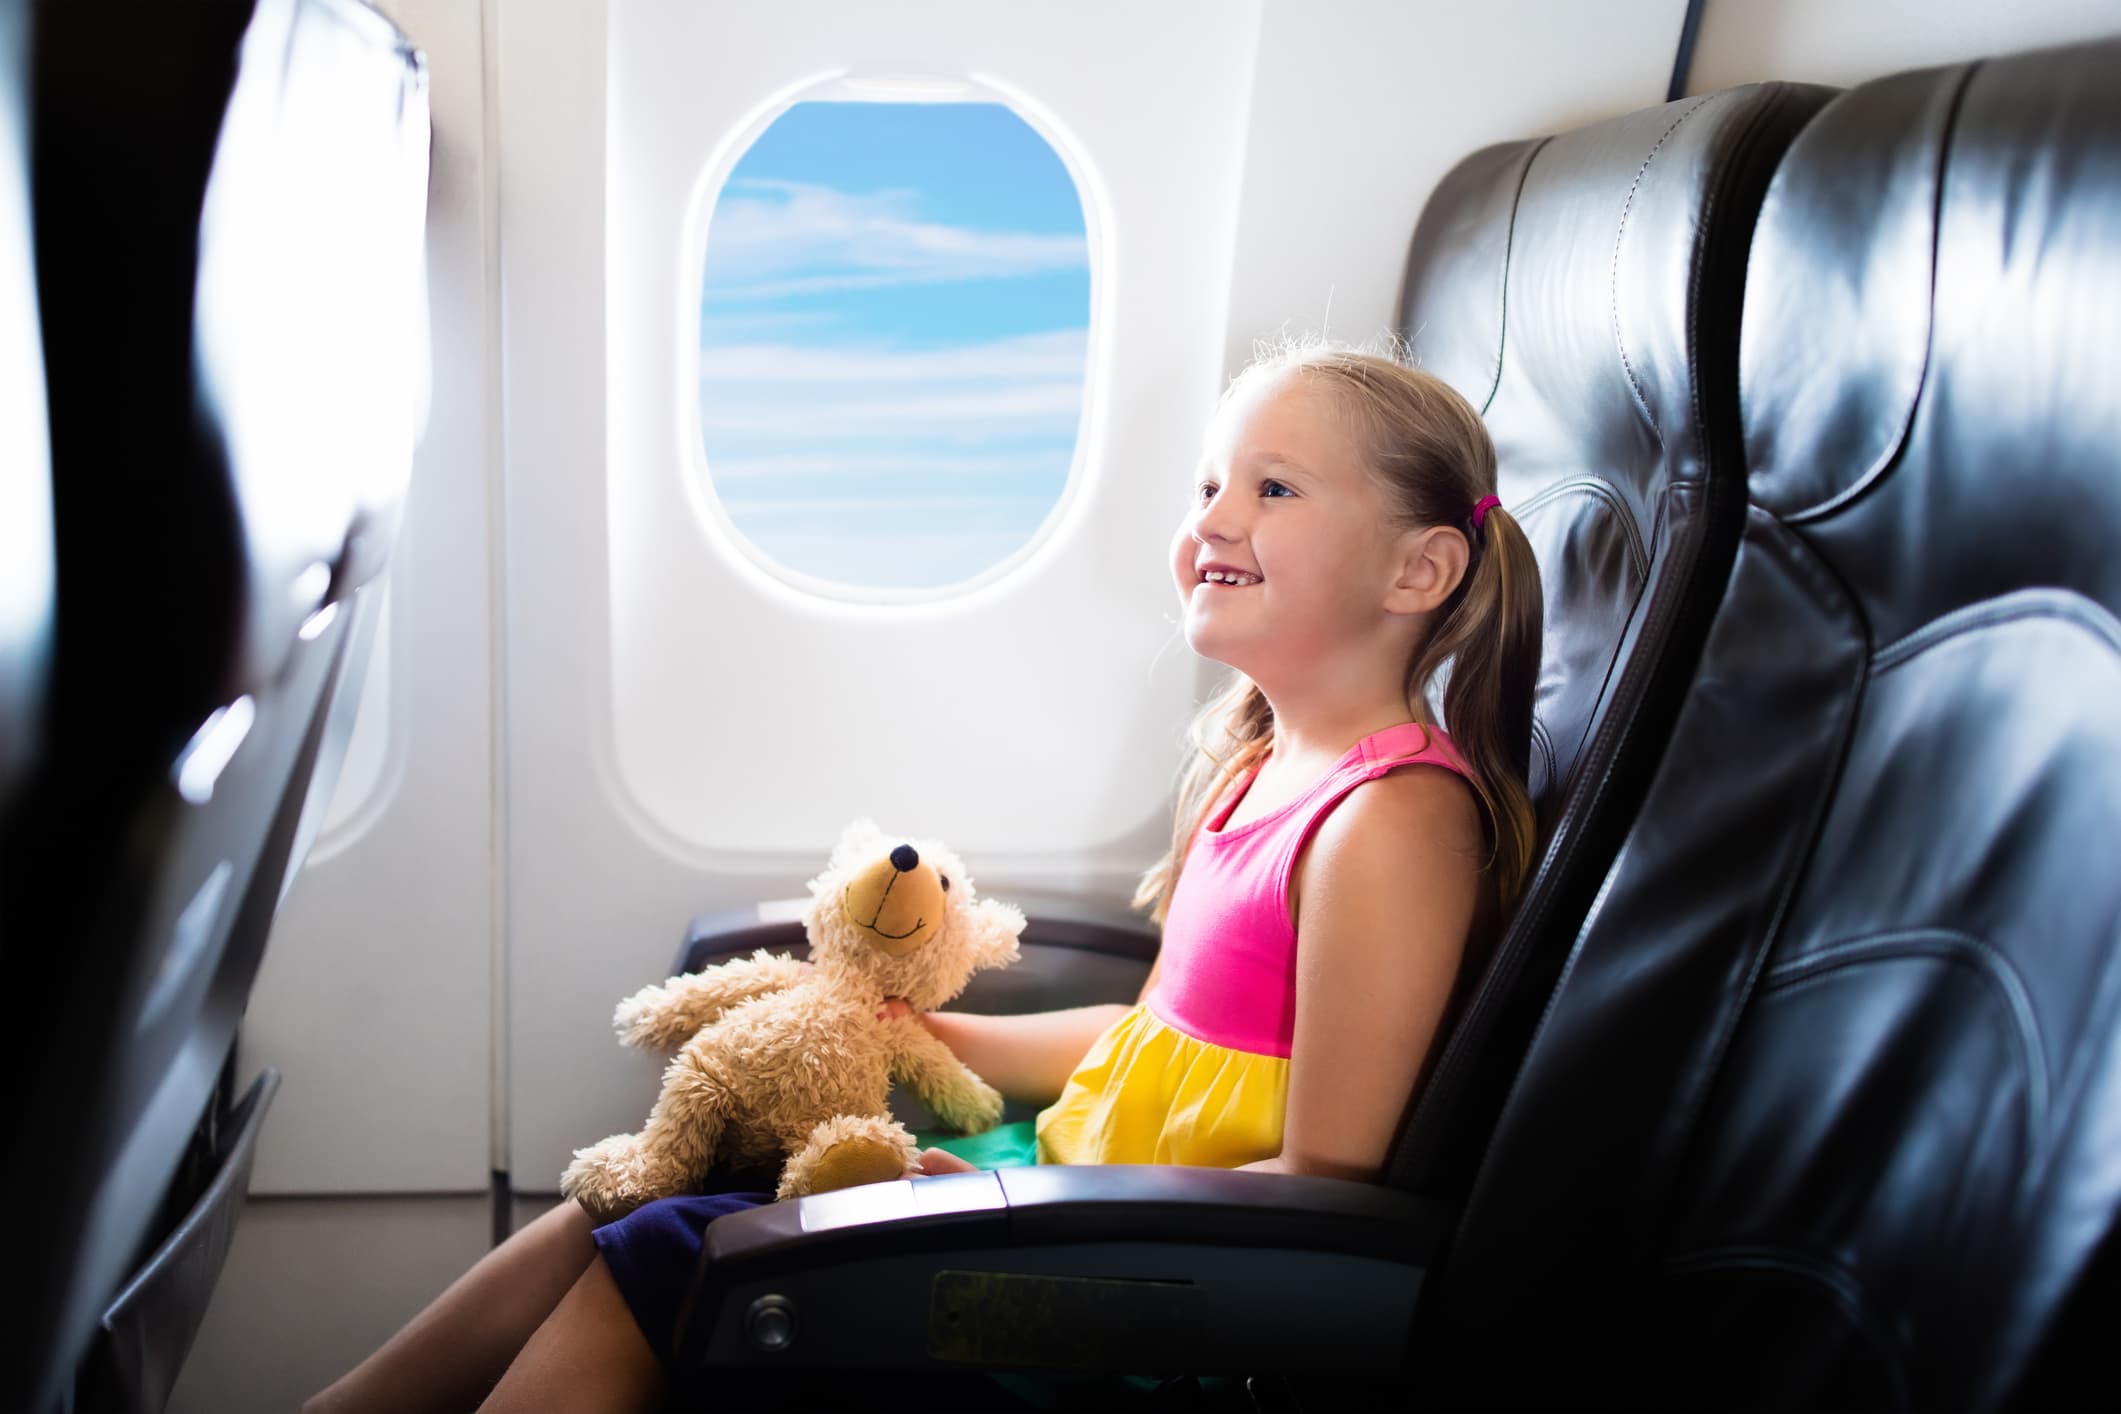 Little girl holding a teddy bear in an airplane window seat